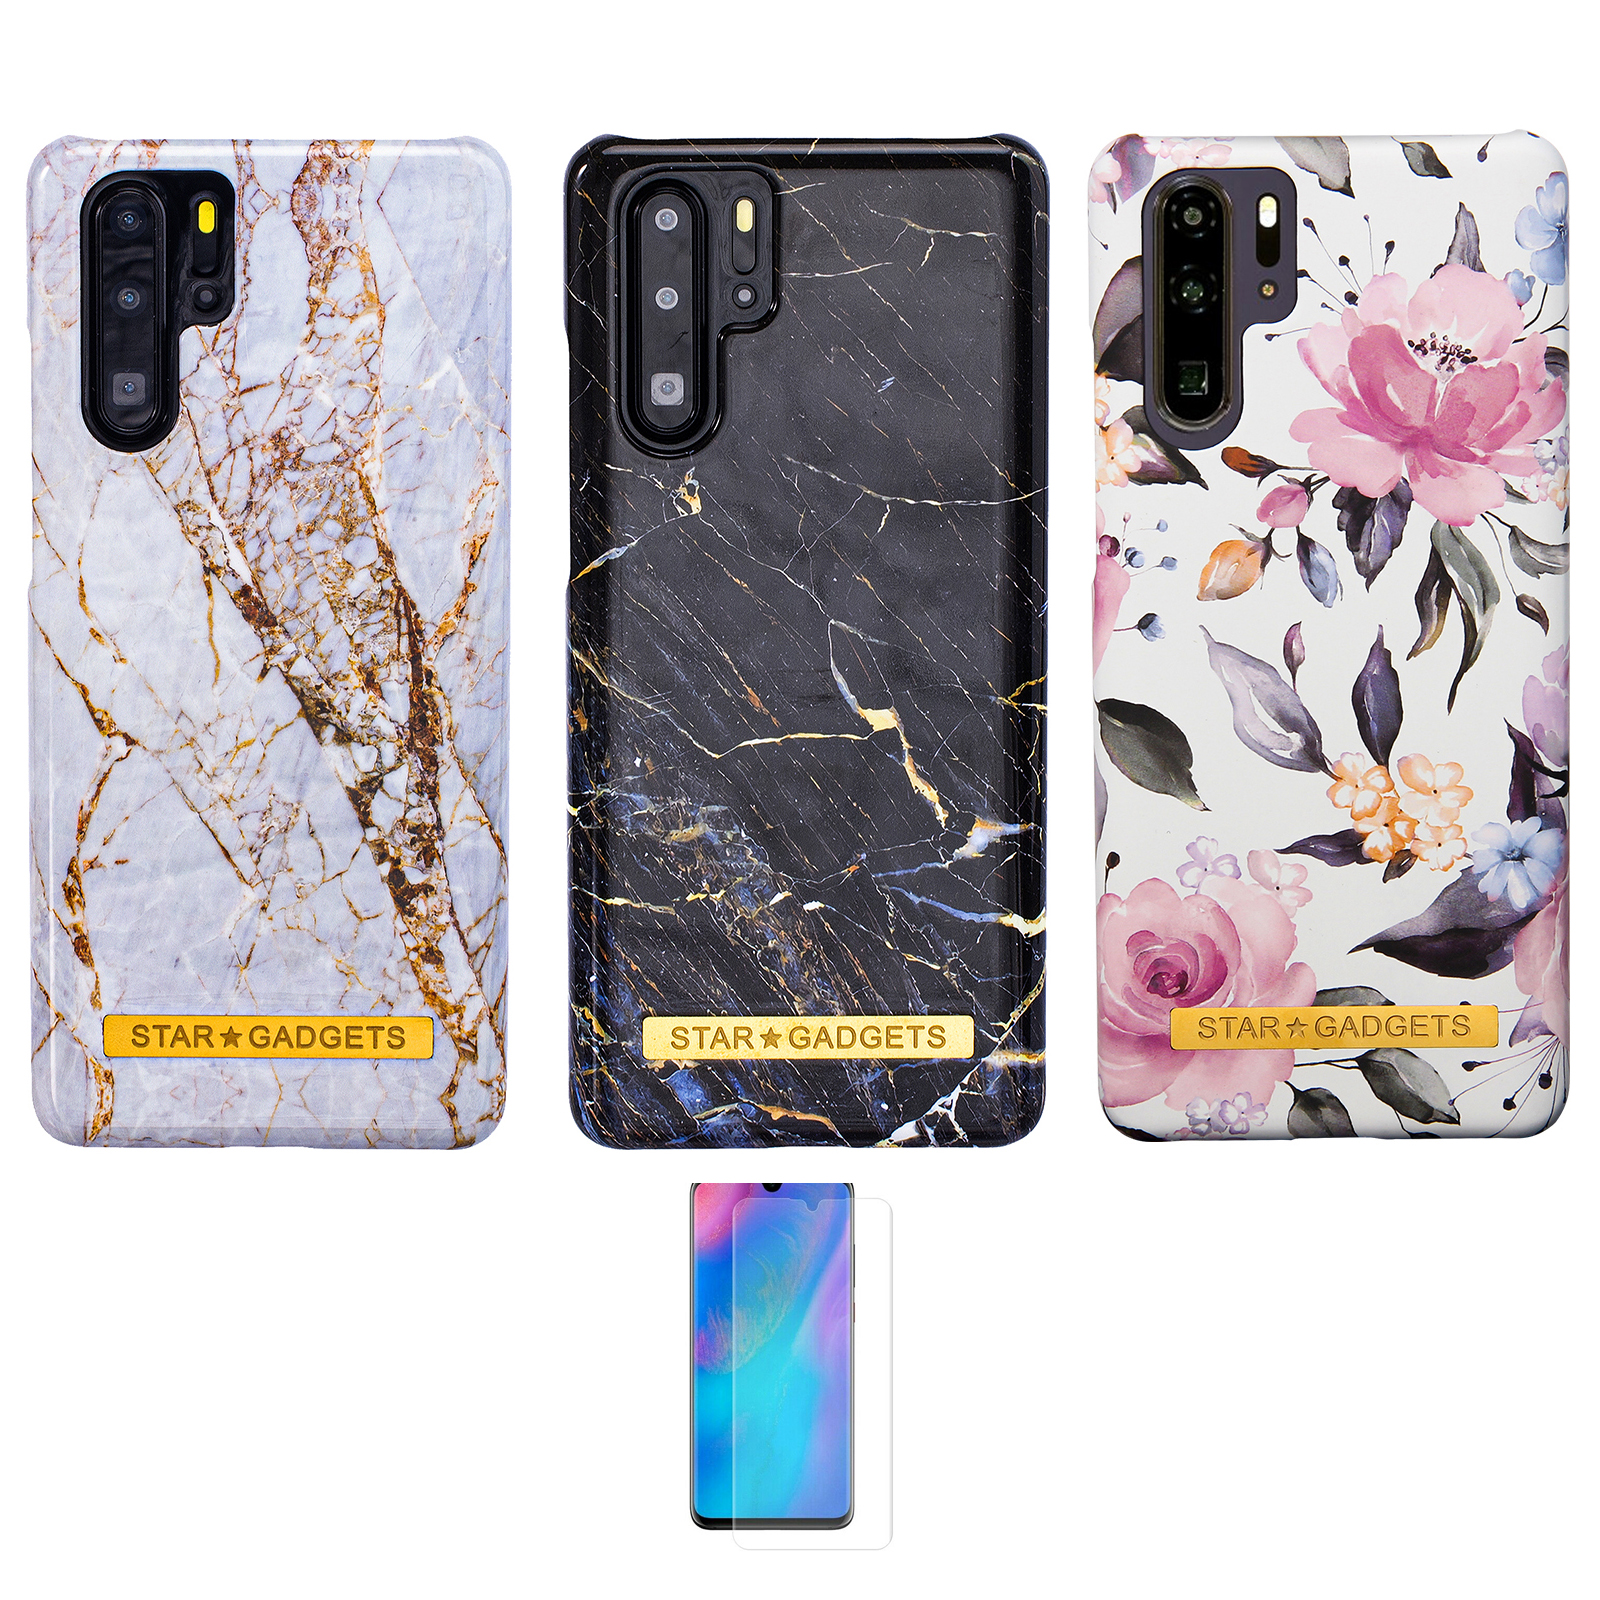 Huawei P30 Pro - Cover / Beskyttelse Flowers / Marble